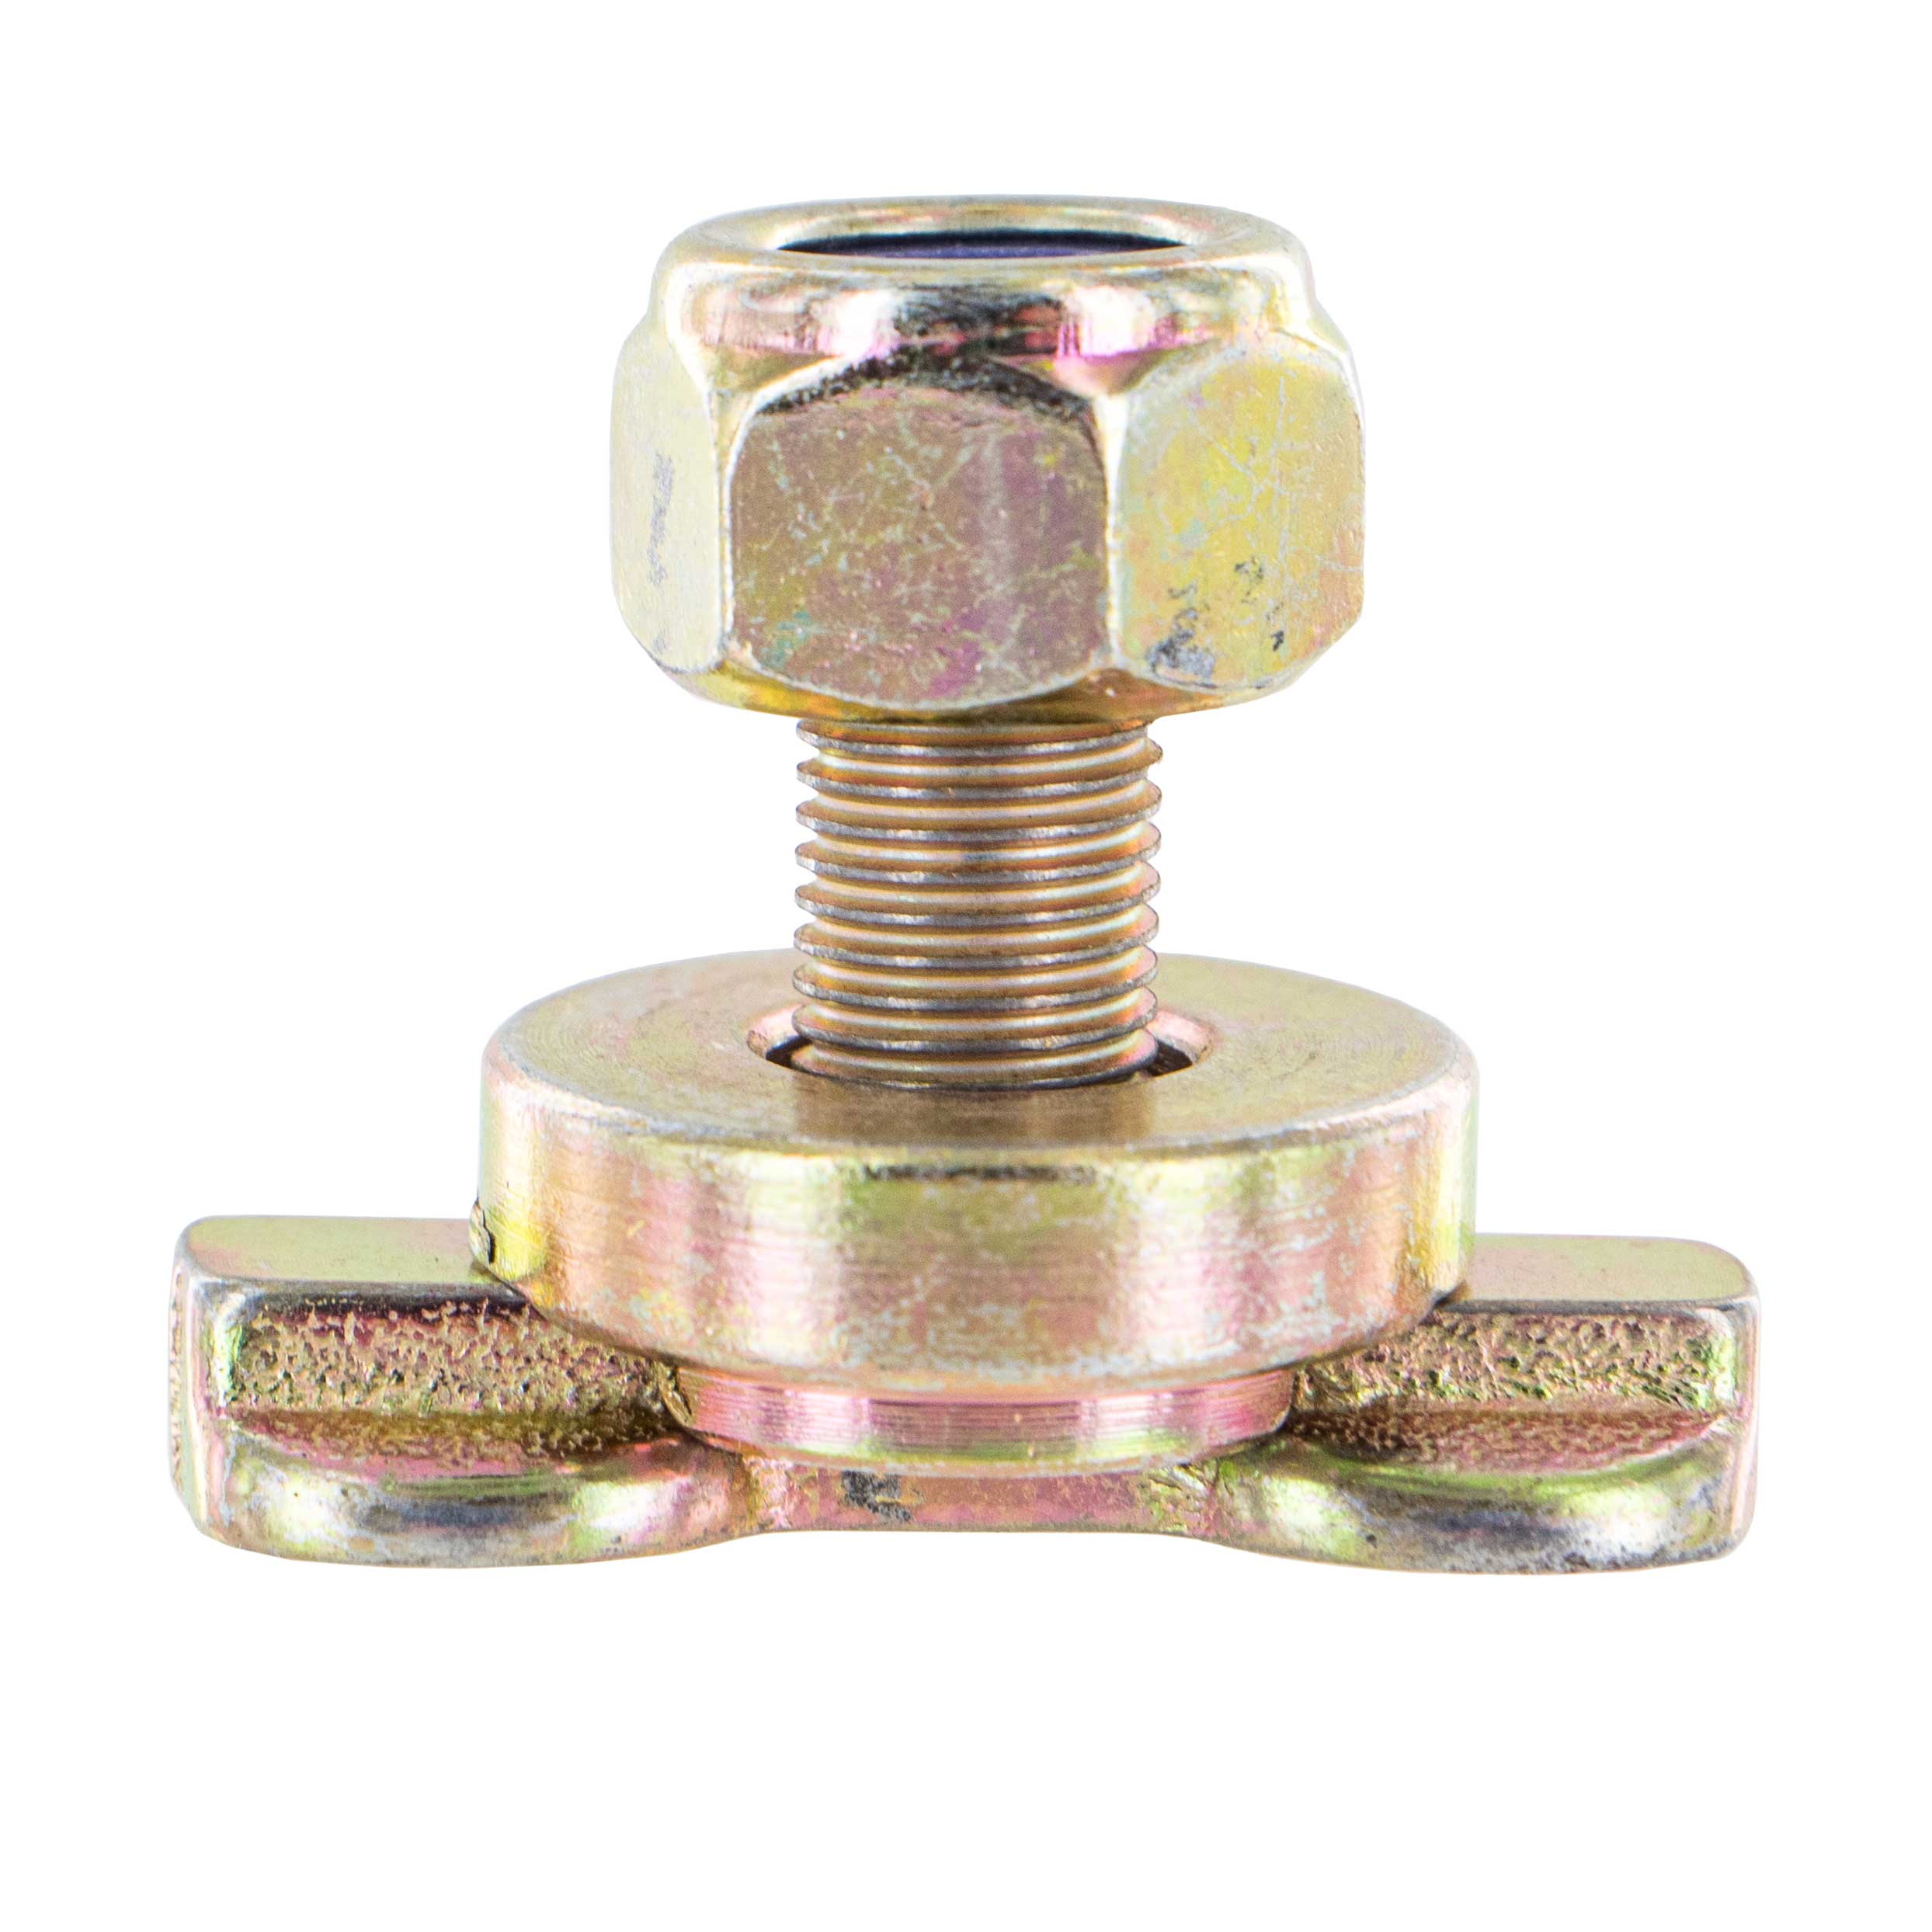 Double Stud Fitting w/ Bolt Thread for L-track - Occupant Restraint Components